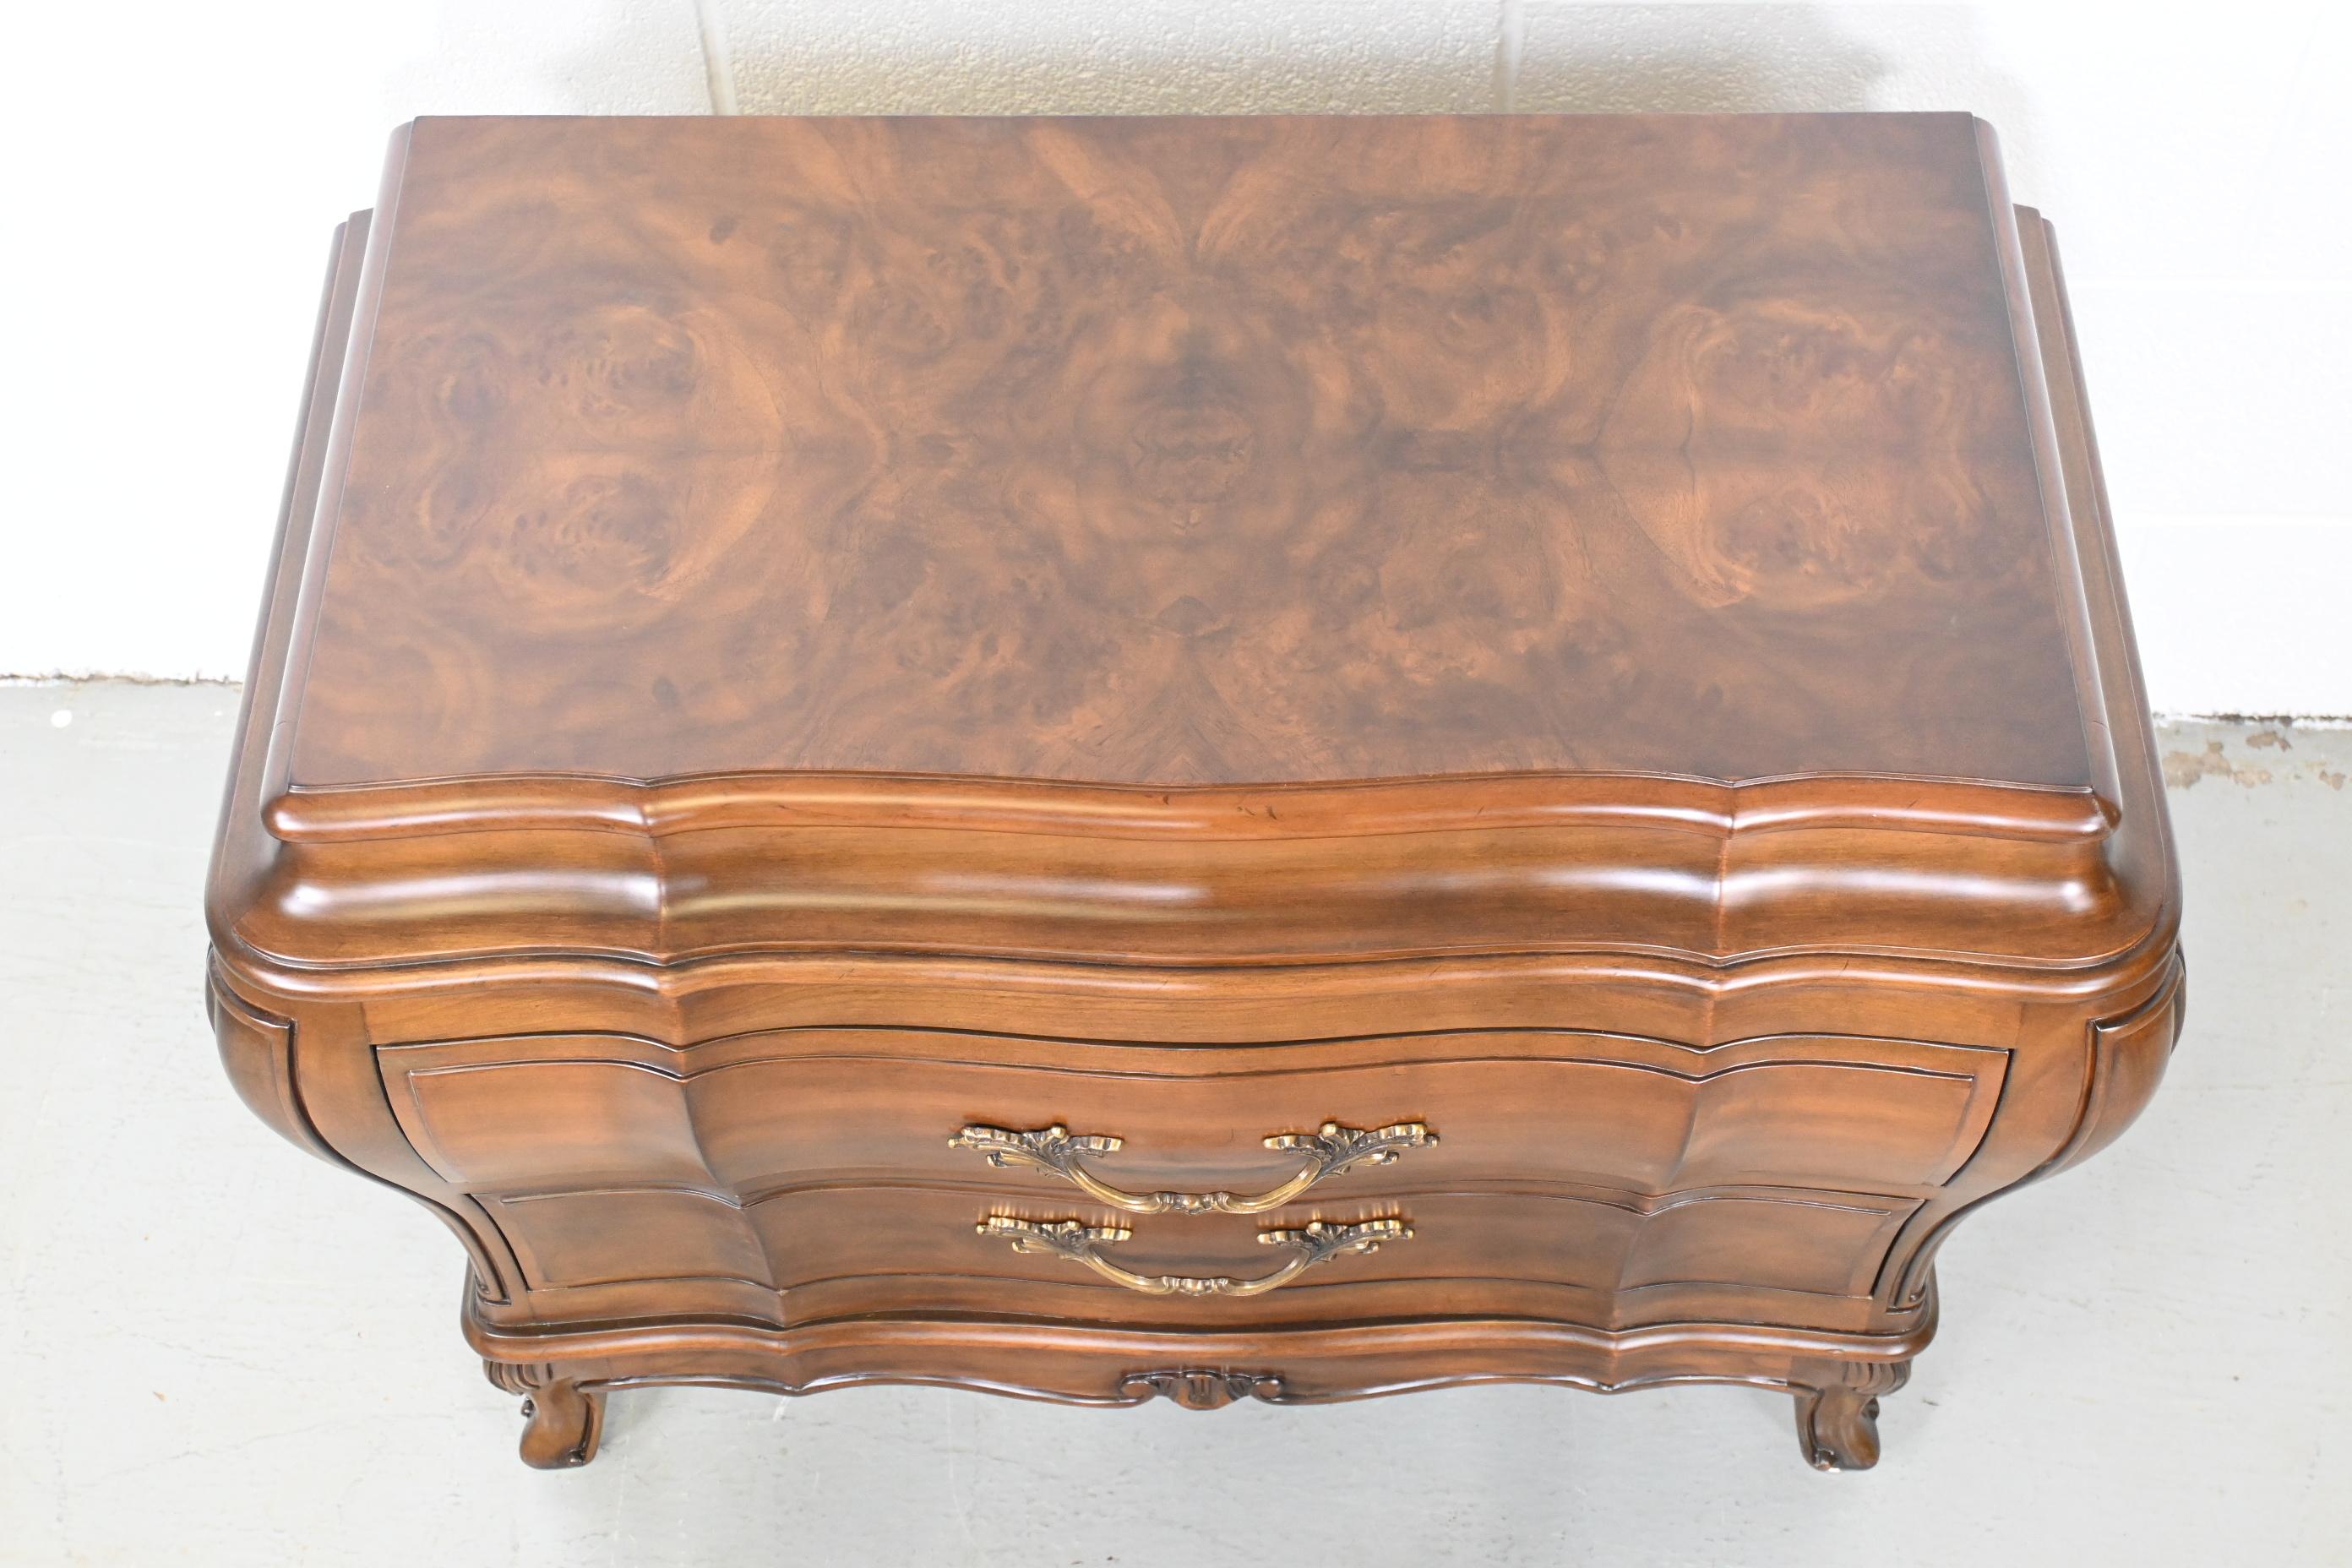 Karges Furniture French Provincial Burl Wood Top Nightstand 1